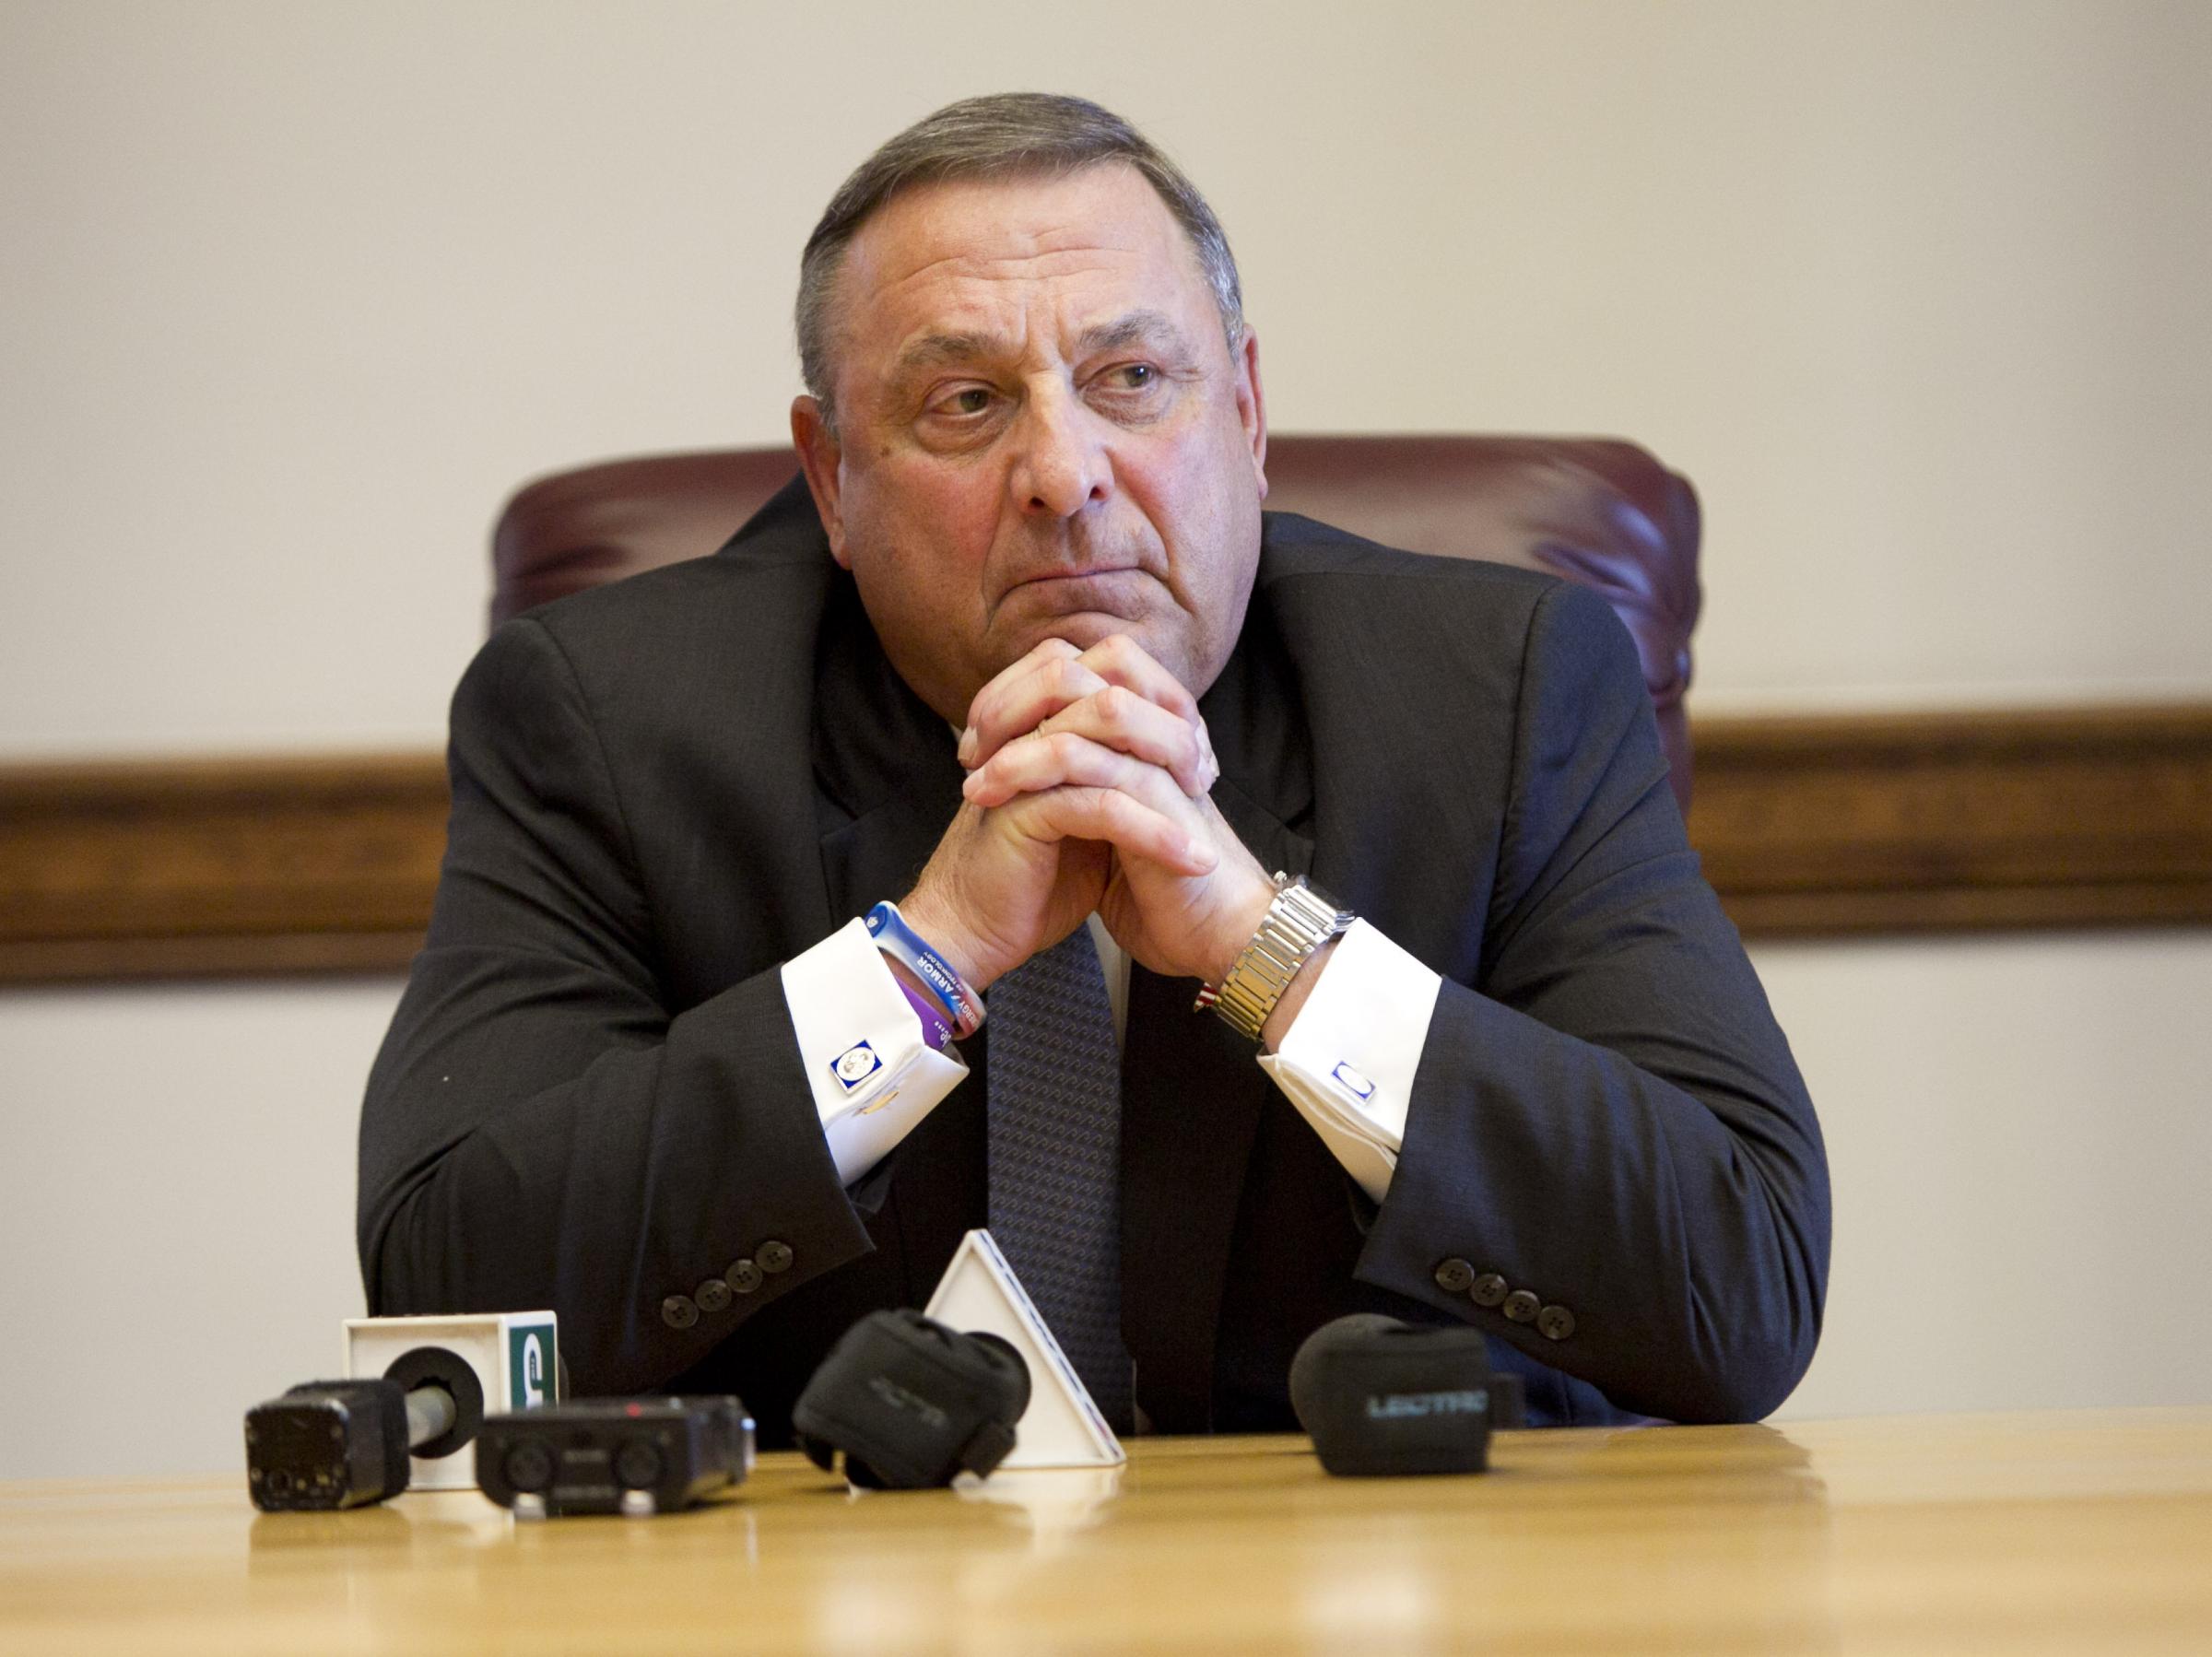 Maine Governor's Rough And Rude Style Clouds His Future | KUOW News and